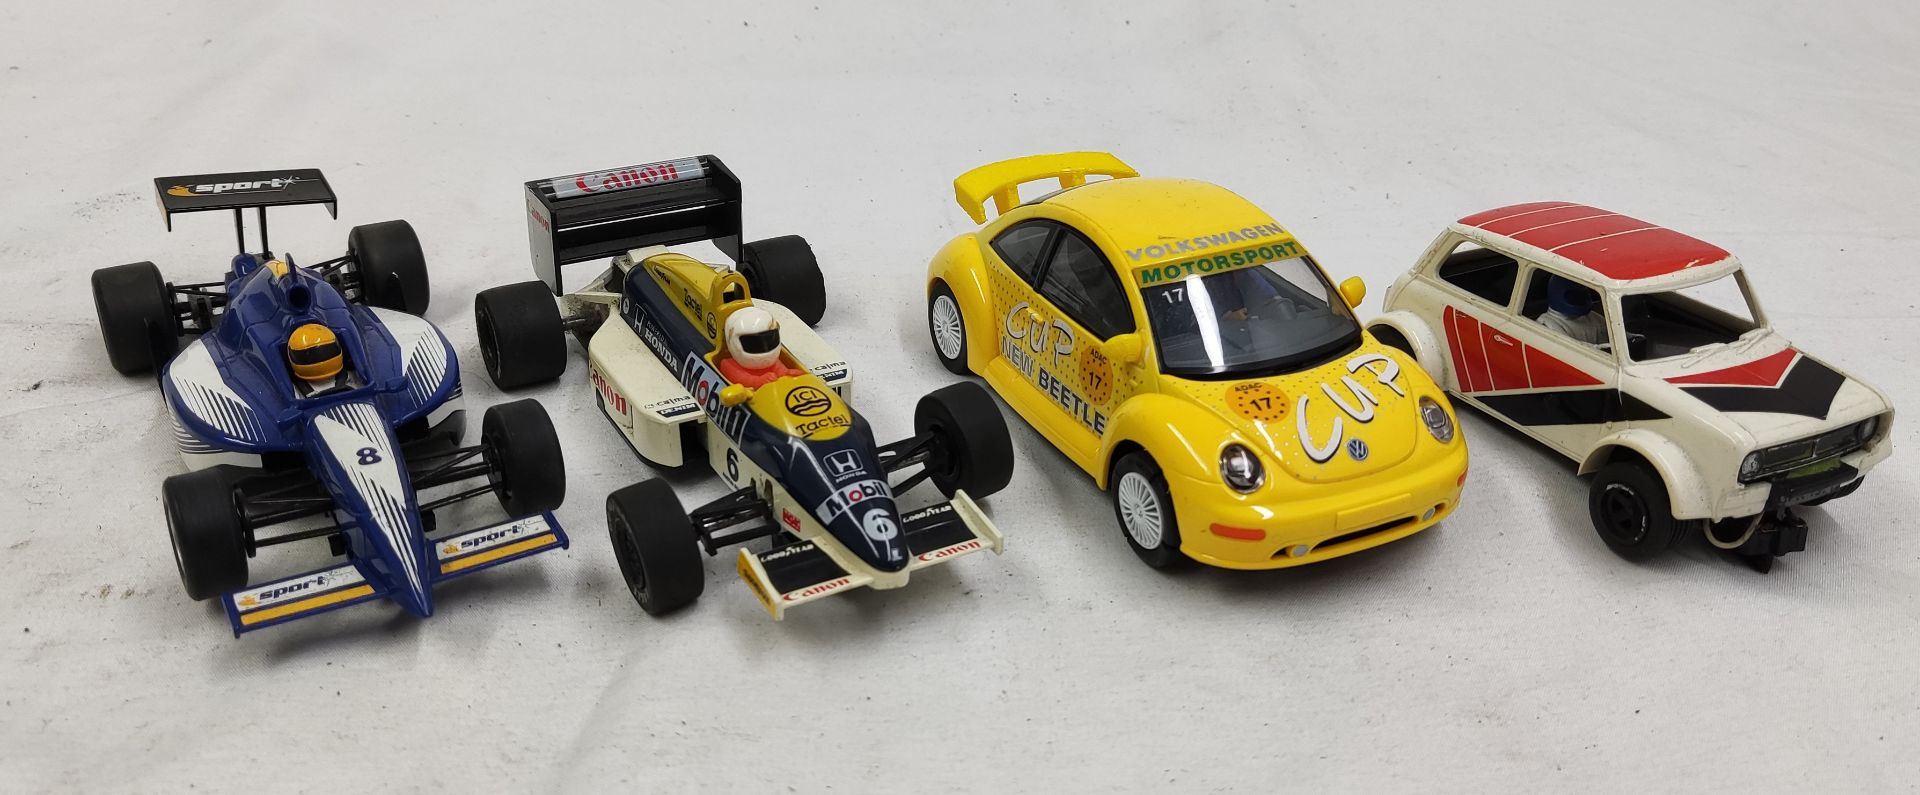 4 x Scalextric Cars Including VW Beetle, F1 Car, Open Wheeler and Mini Clubman 1275GT - Tested and - Image 3 of 11